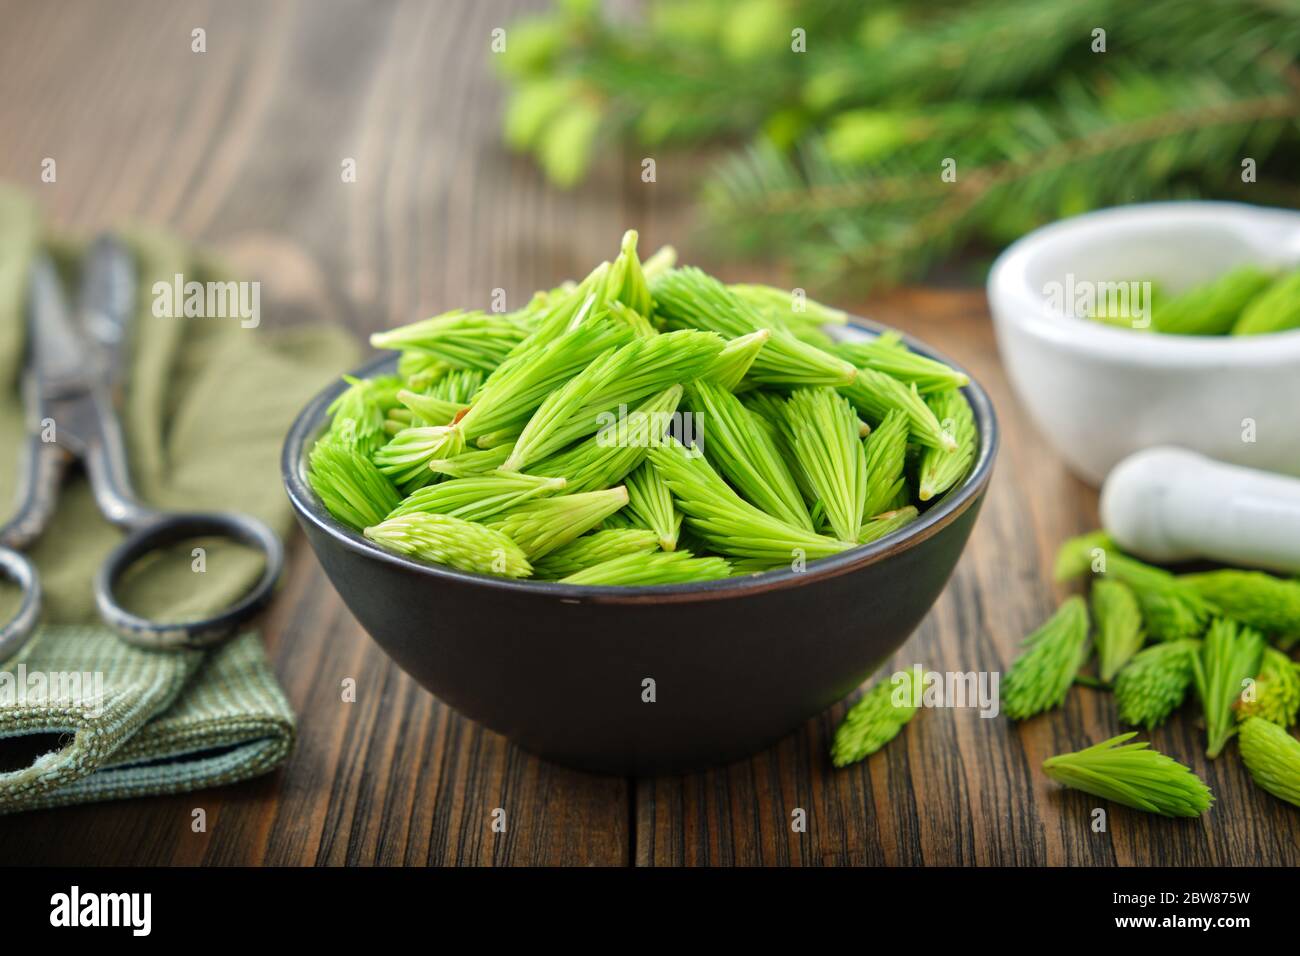 Spruce tips in a black bowl, mortar of fir buds and needles, twigs of fir tree on wooden table. Stock Photo